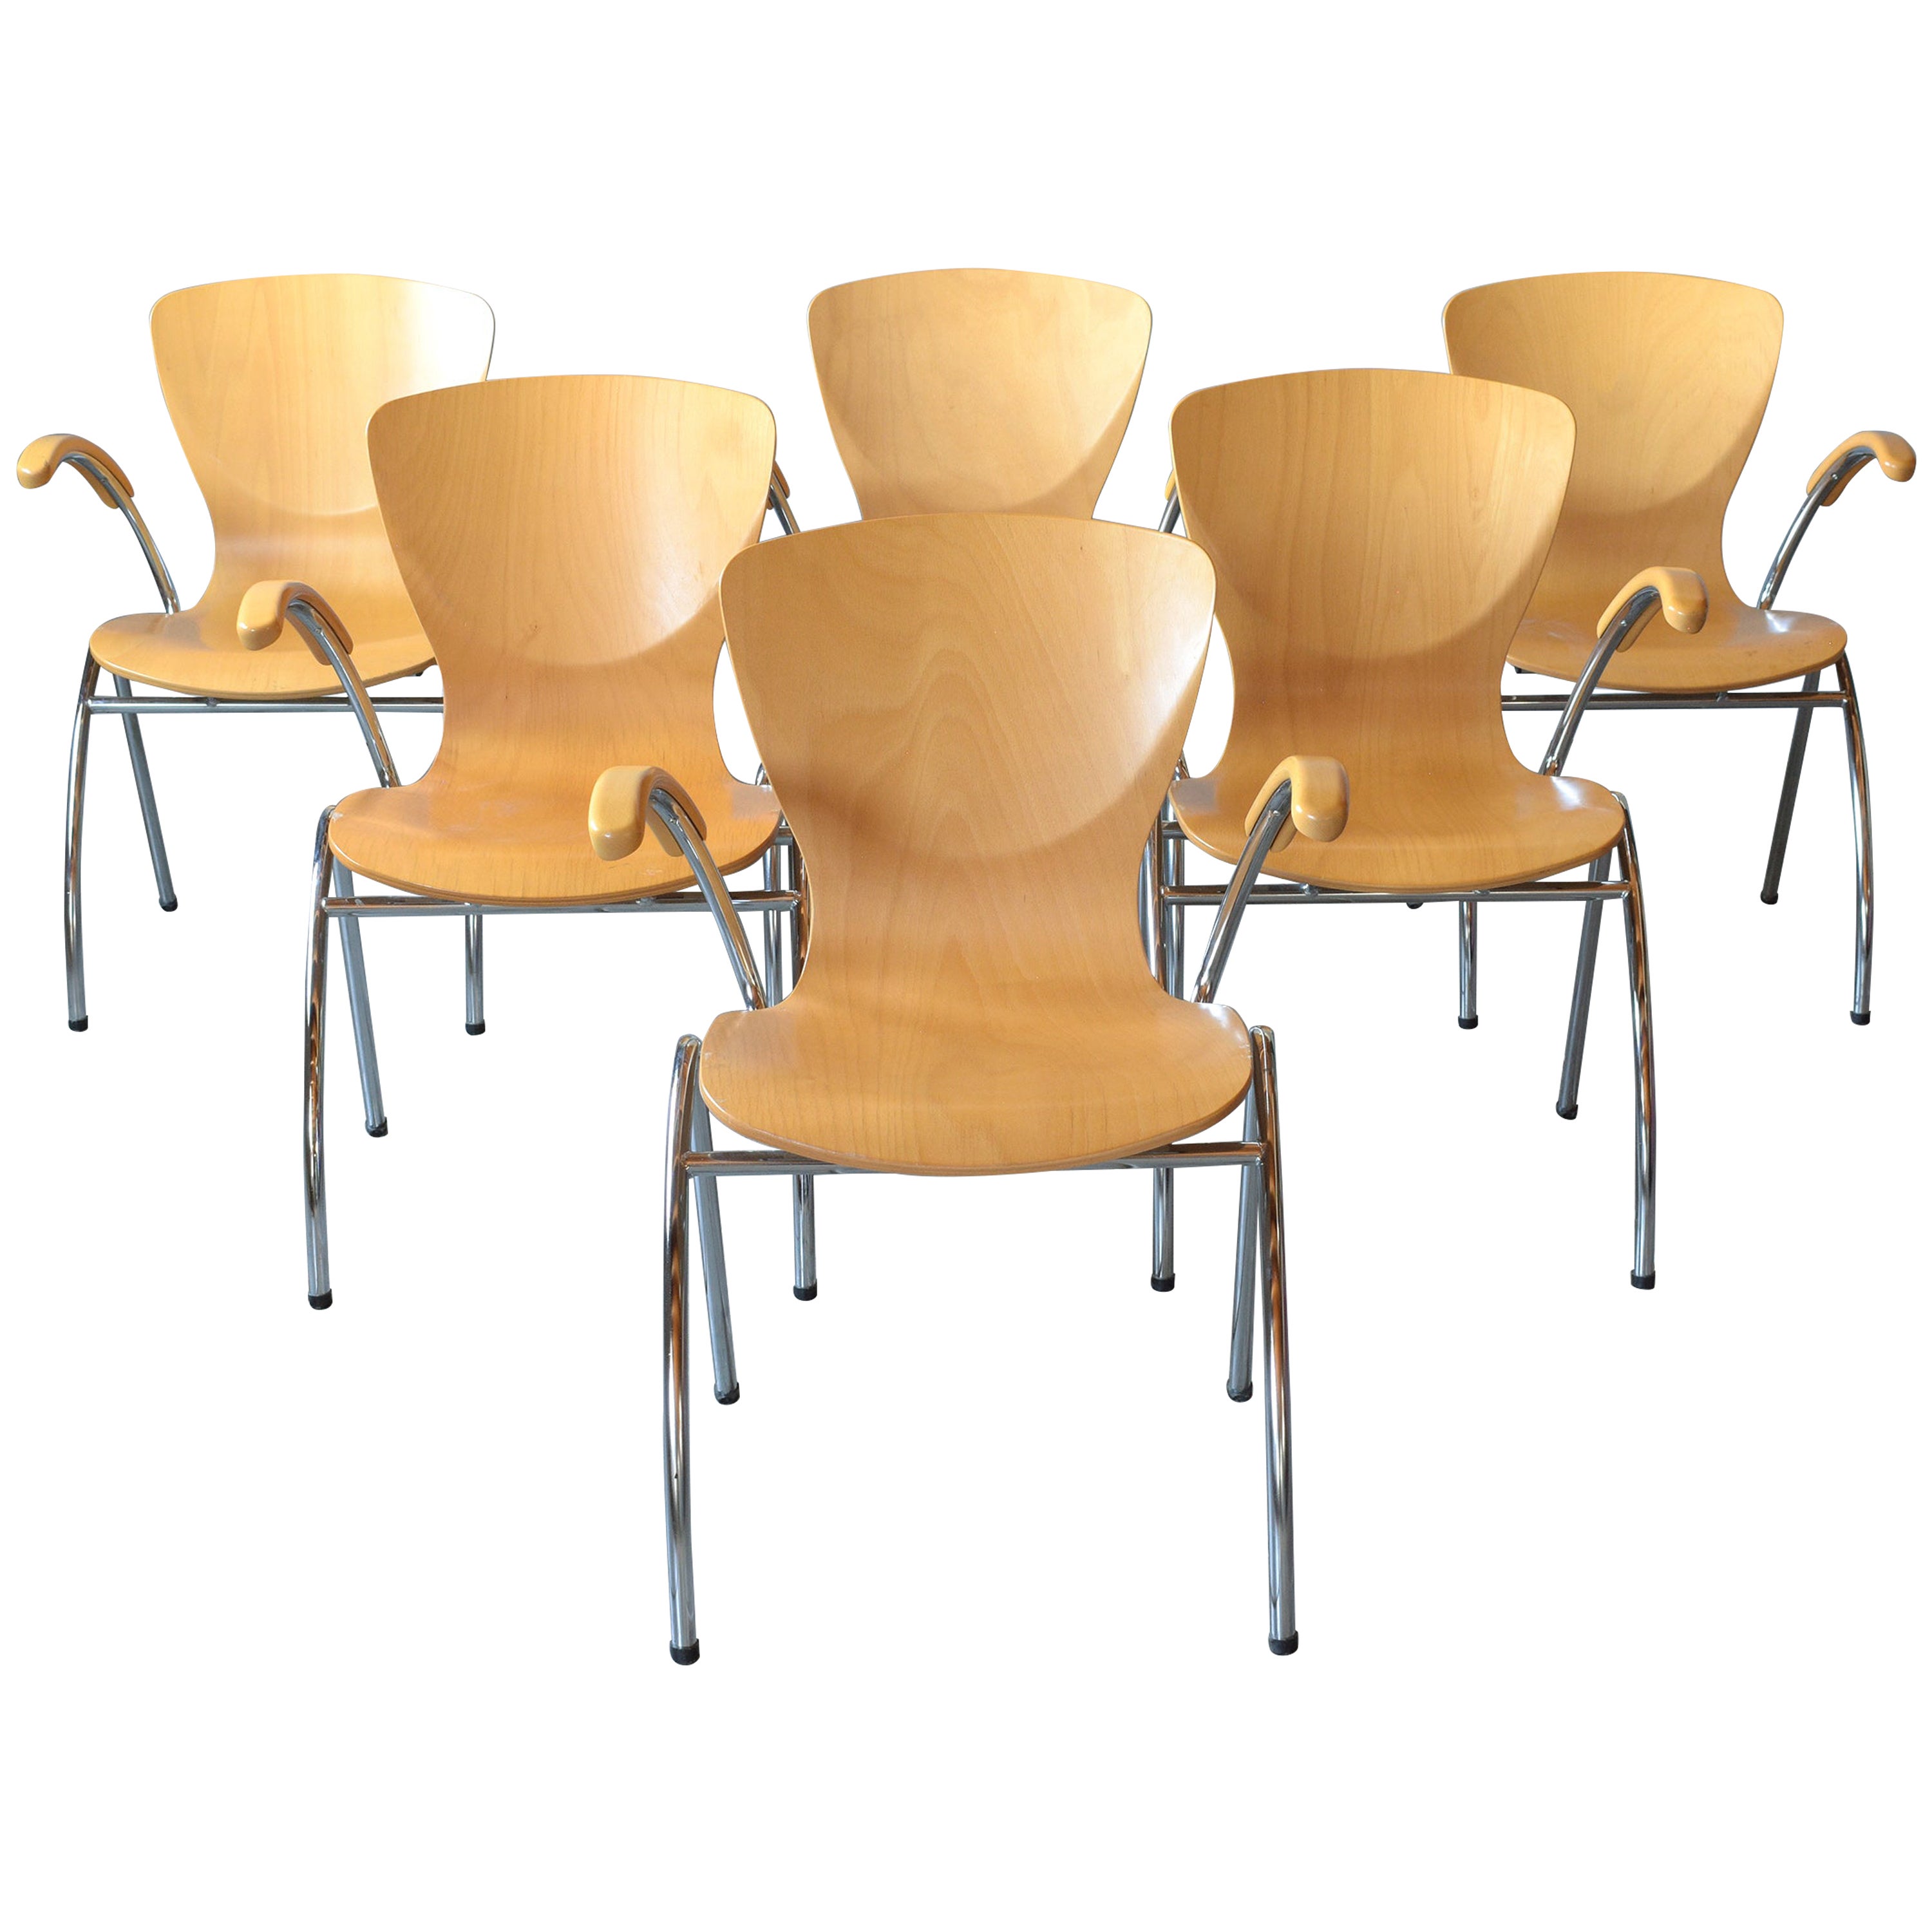 21st-Century Mid-Century Modern Dining Chairs: Set of Six For Sale